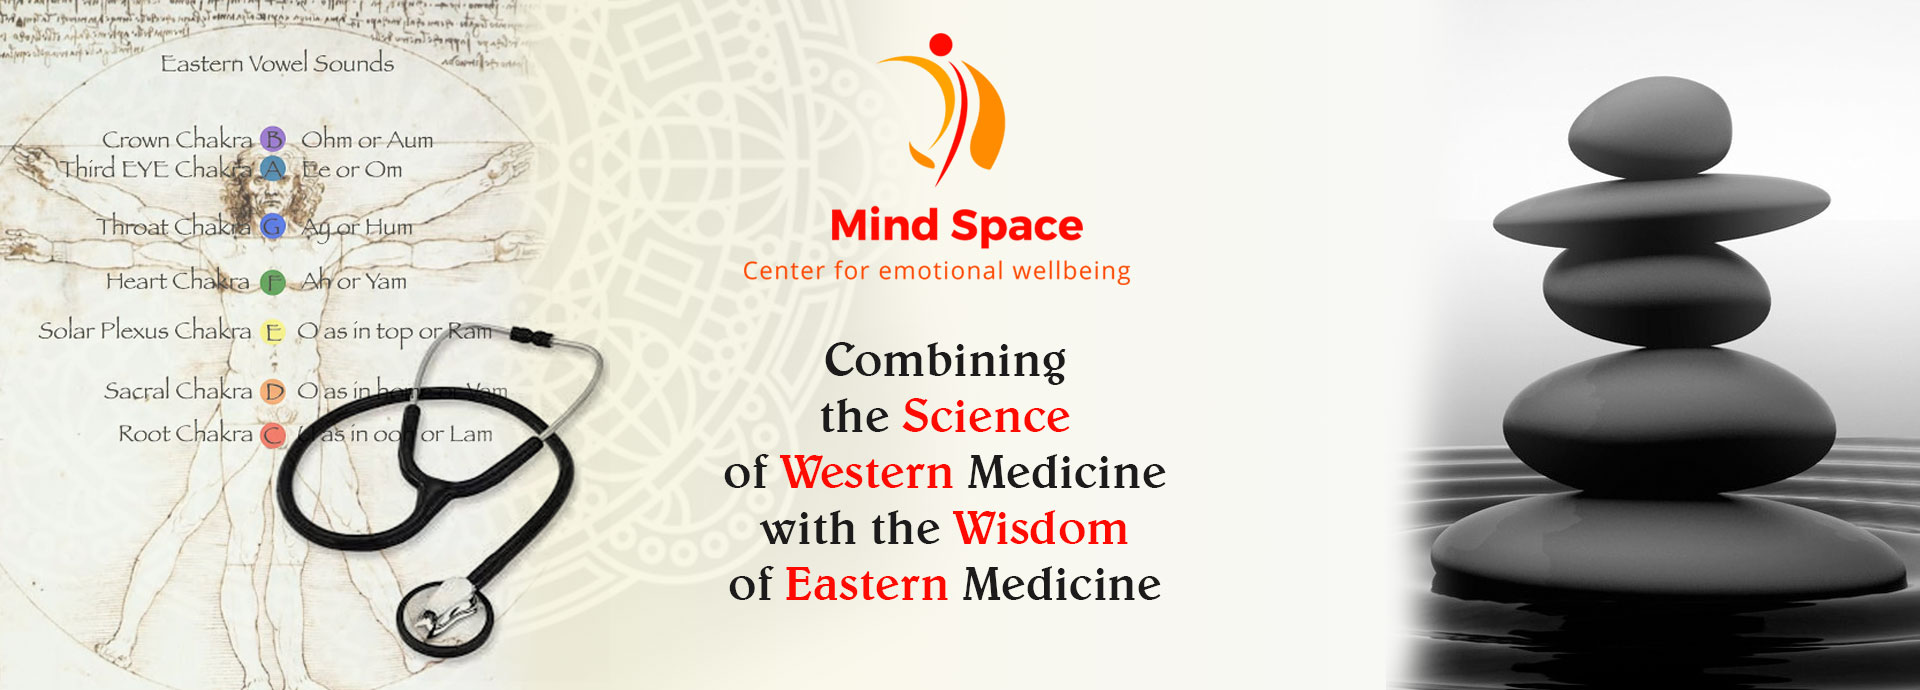 Mind Space Clinic